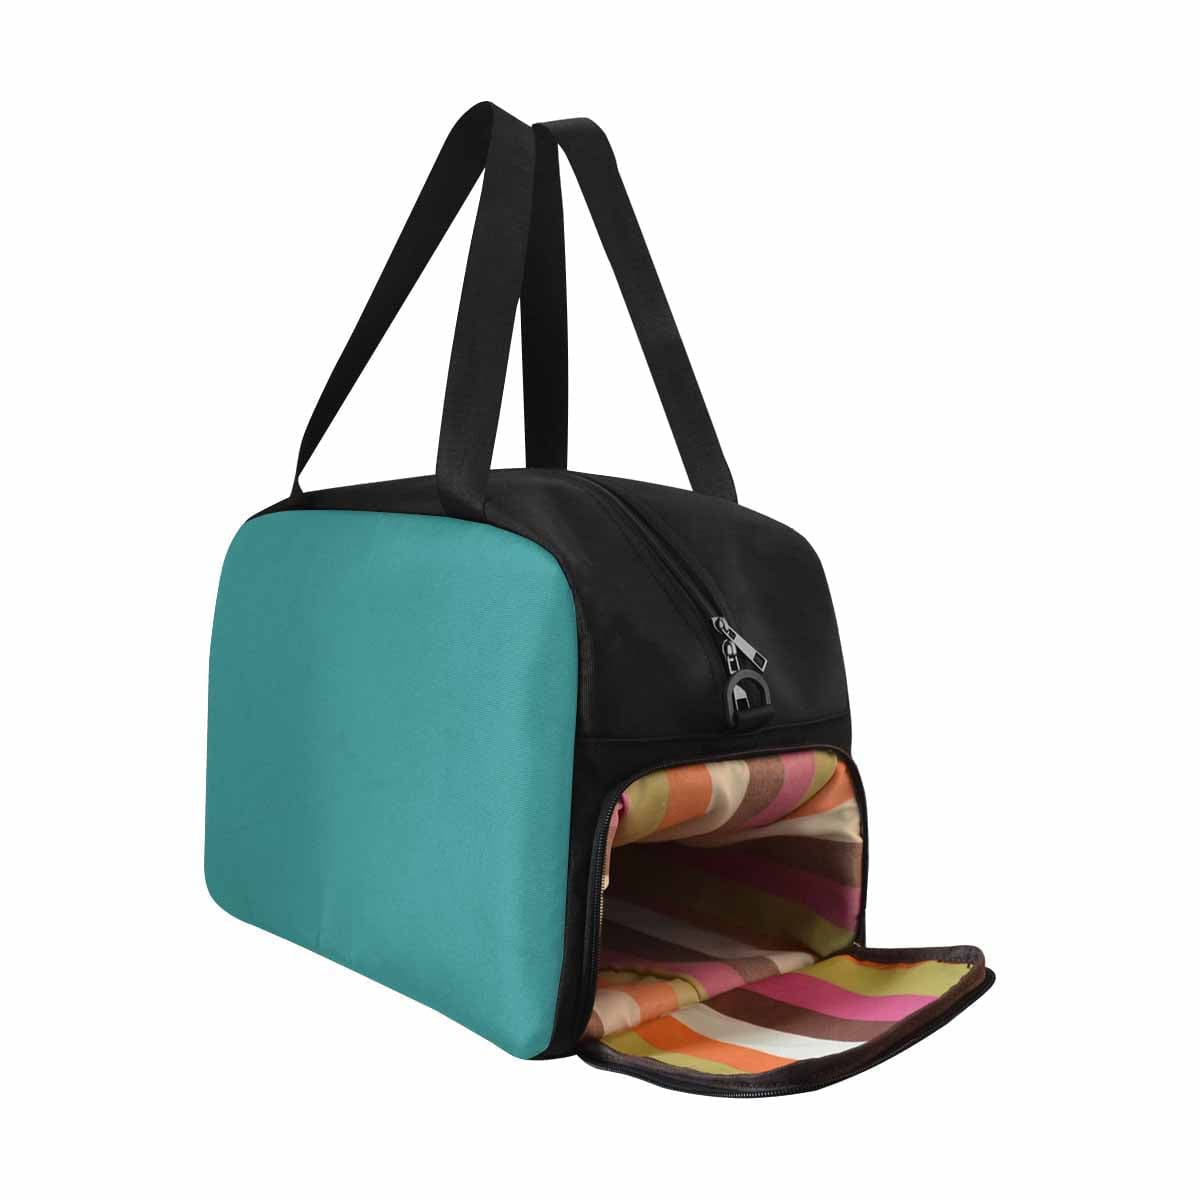 Mint Blue Tote And Crossbody Travel Bag - Bags | Travel Bags | Crossbody